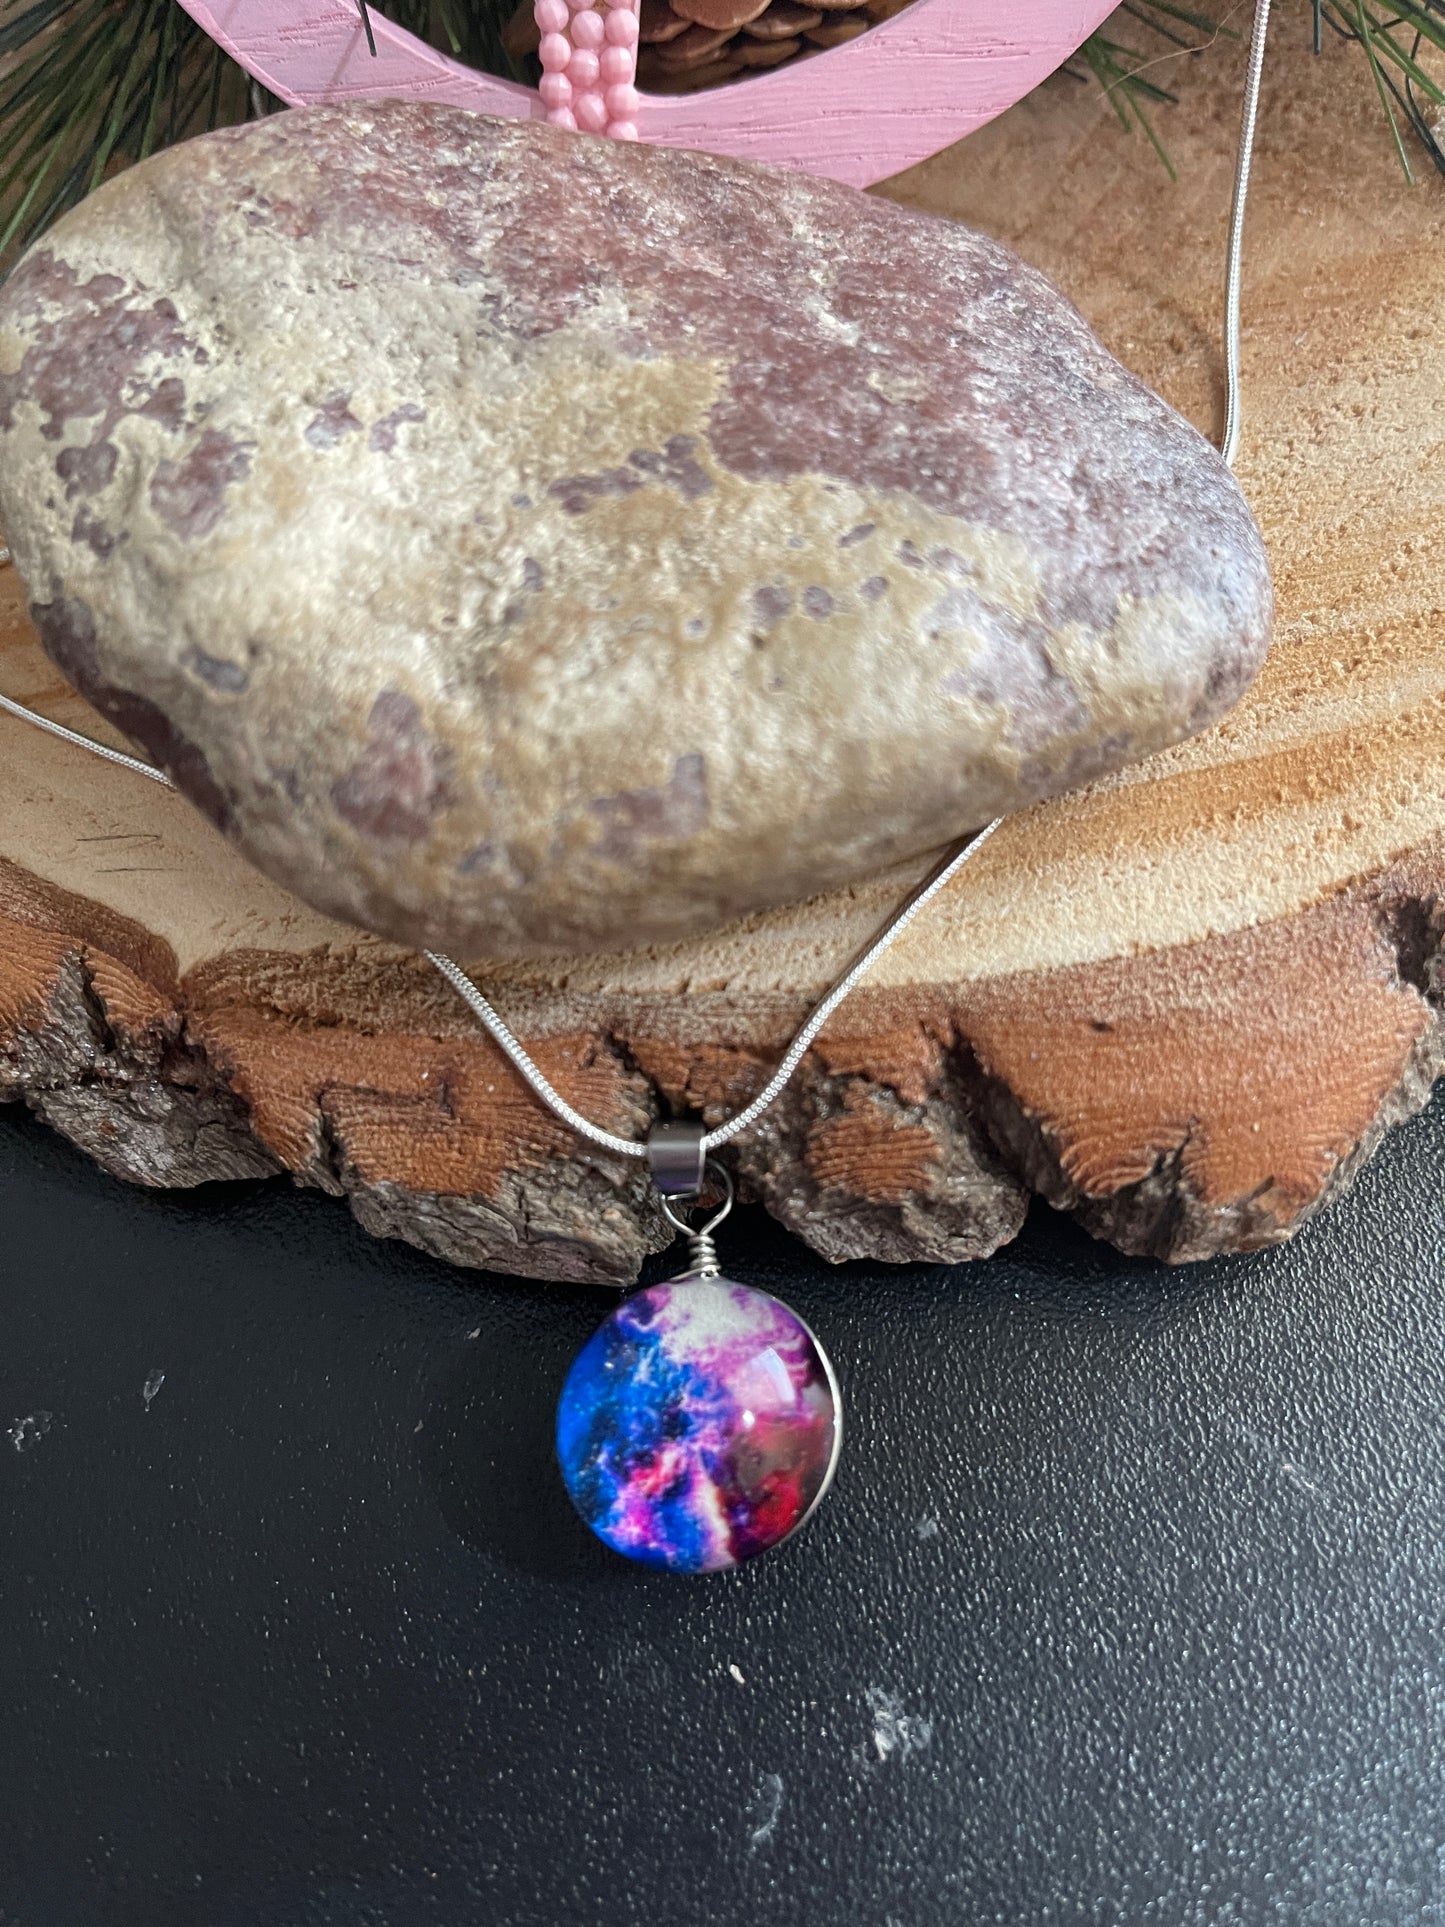 Wire Wrapped Glass Galaxy Purple Nebula Pendant on a Silver chain NecklacePink tiful of LOVE